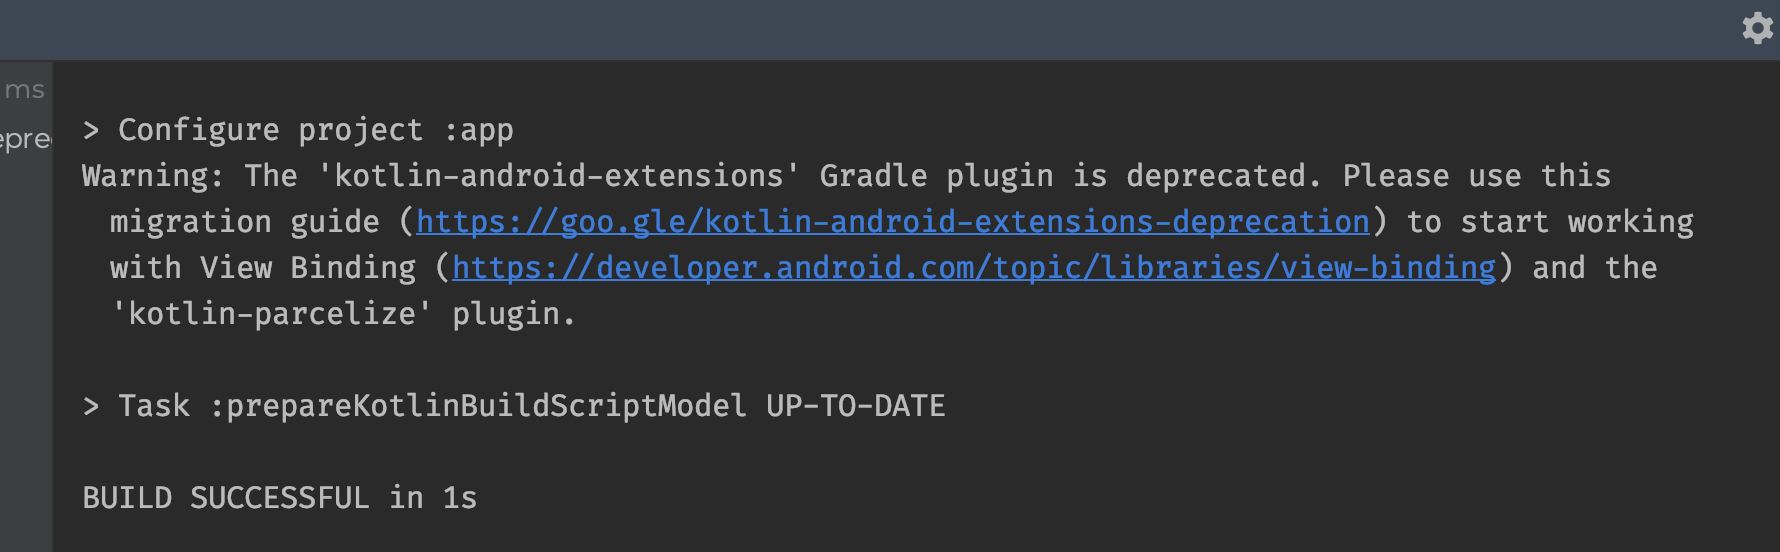 kotlin-android-extensions-deprecated